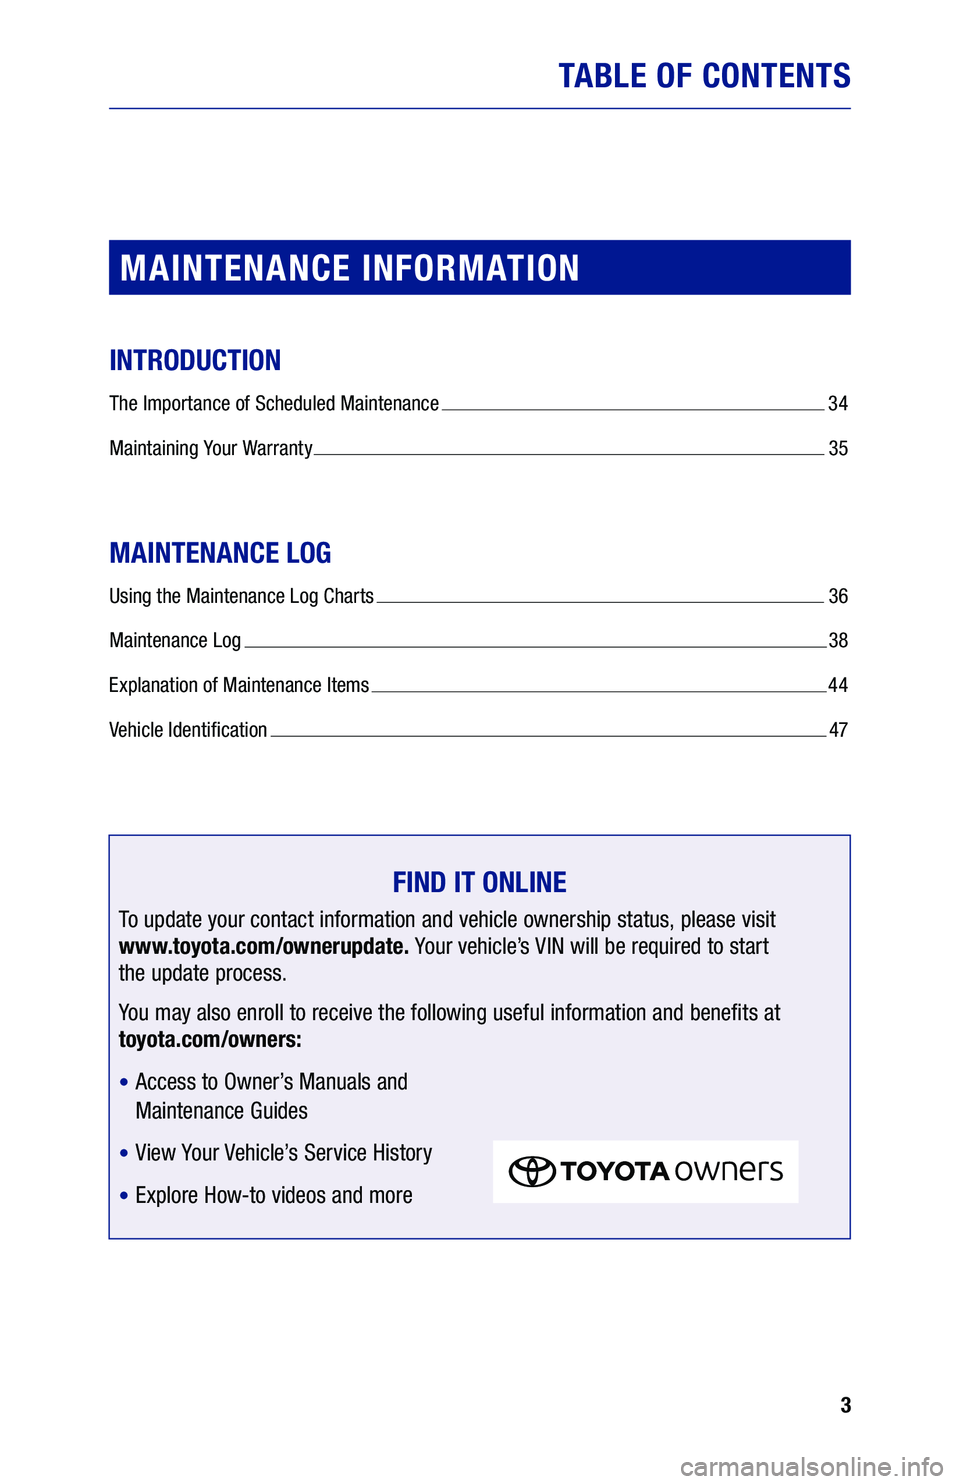 TOYOTA SUPRA 2020  Warranties & Maintenance Guides (in English) 3
TABLE OF CONTENTS
MAINTENANCE INFORMATION
INTRODUCTION
The Importance of Scheduled Maintenance  34
Maintaining Your Warranty 
  35
MAINTENANCE LOG
Using the Maintenance Log Charts  36
Maintenance Lo